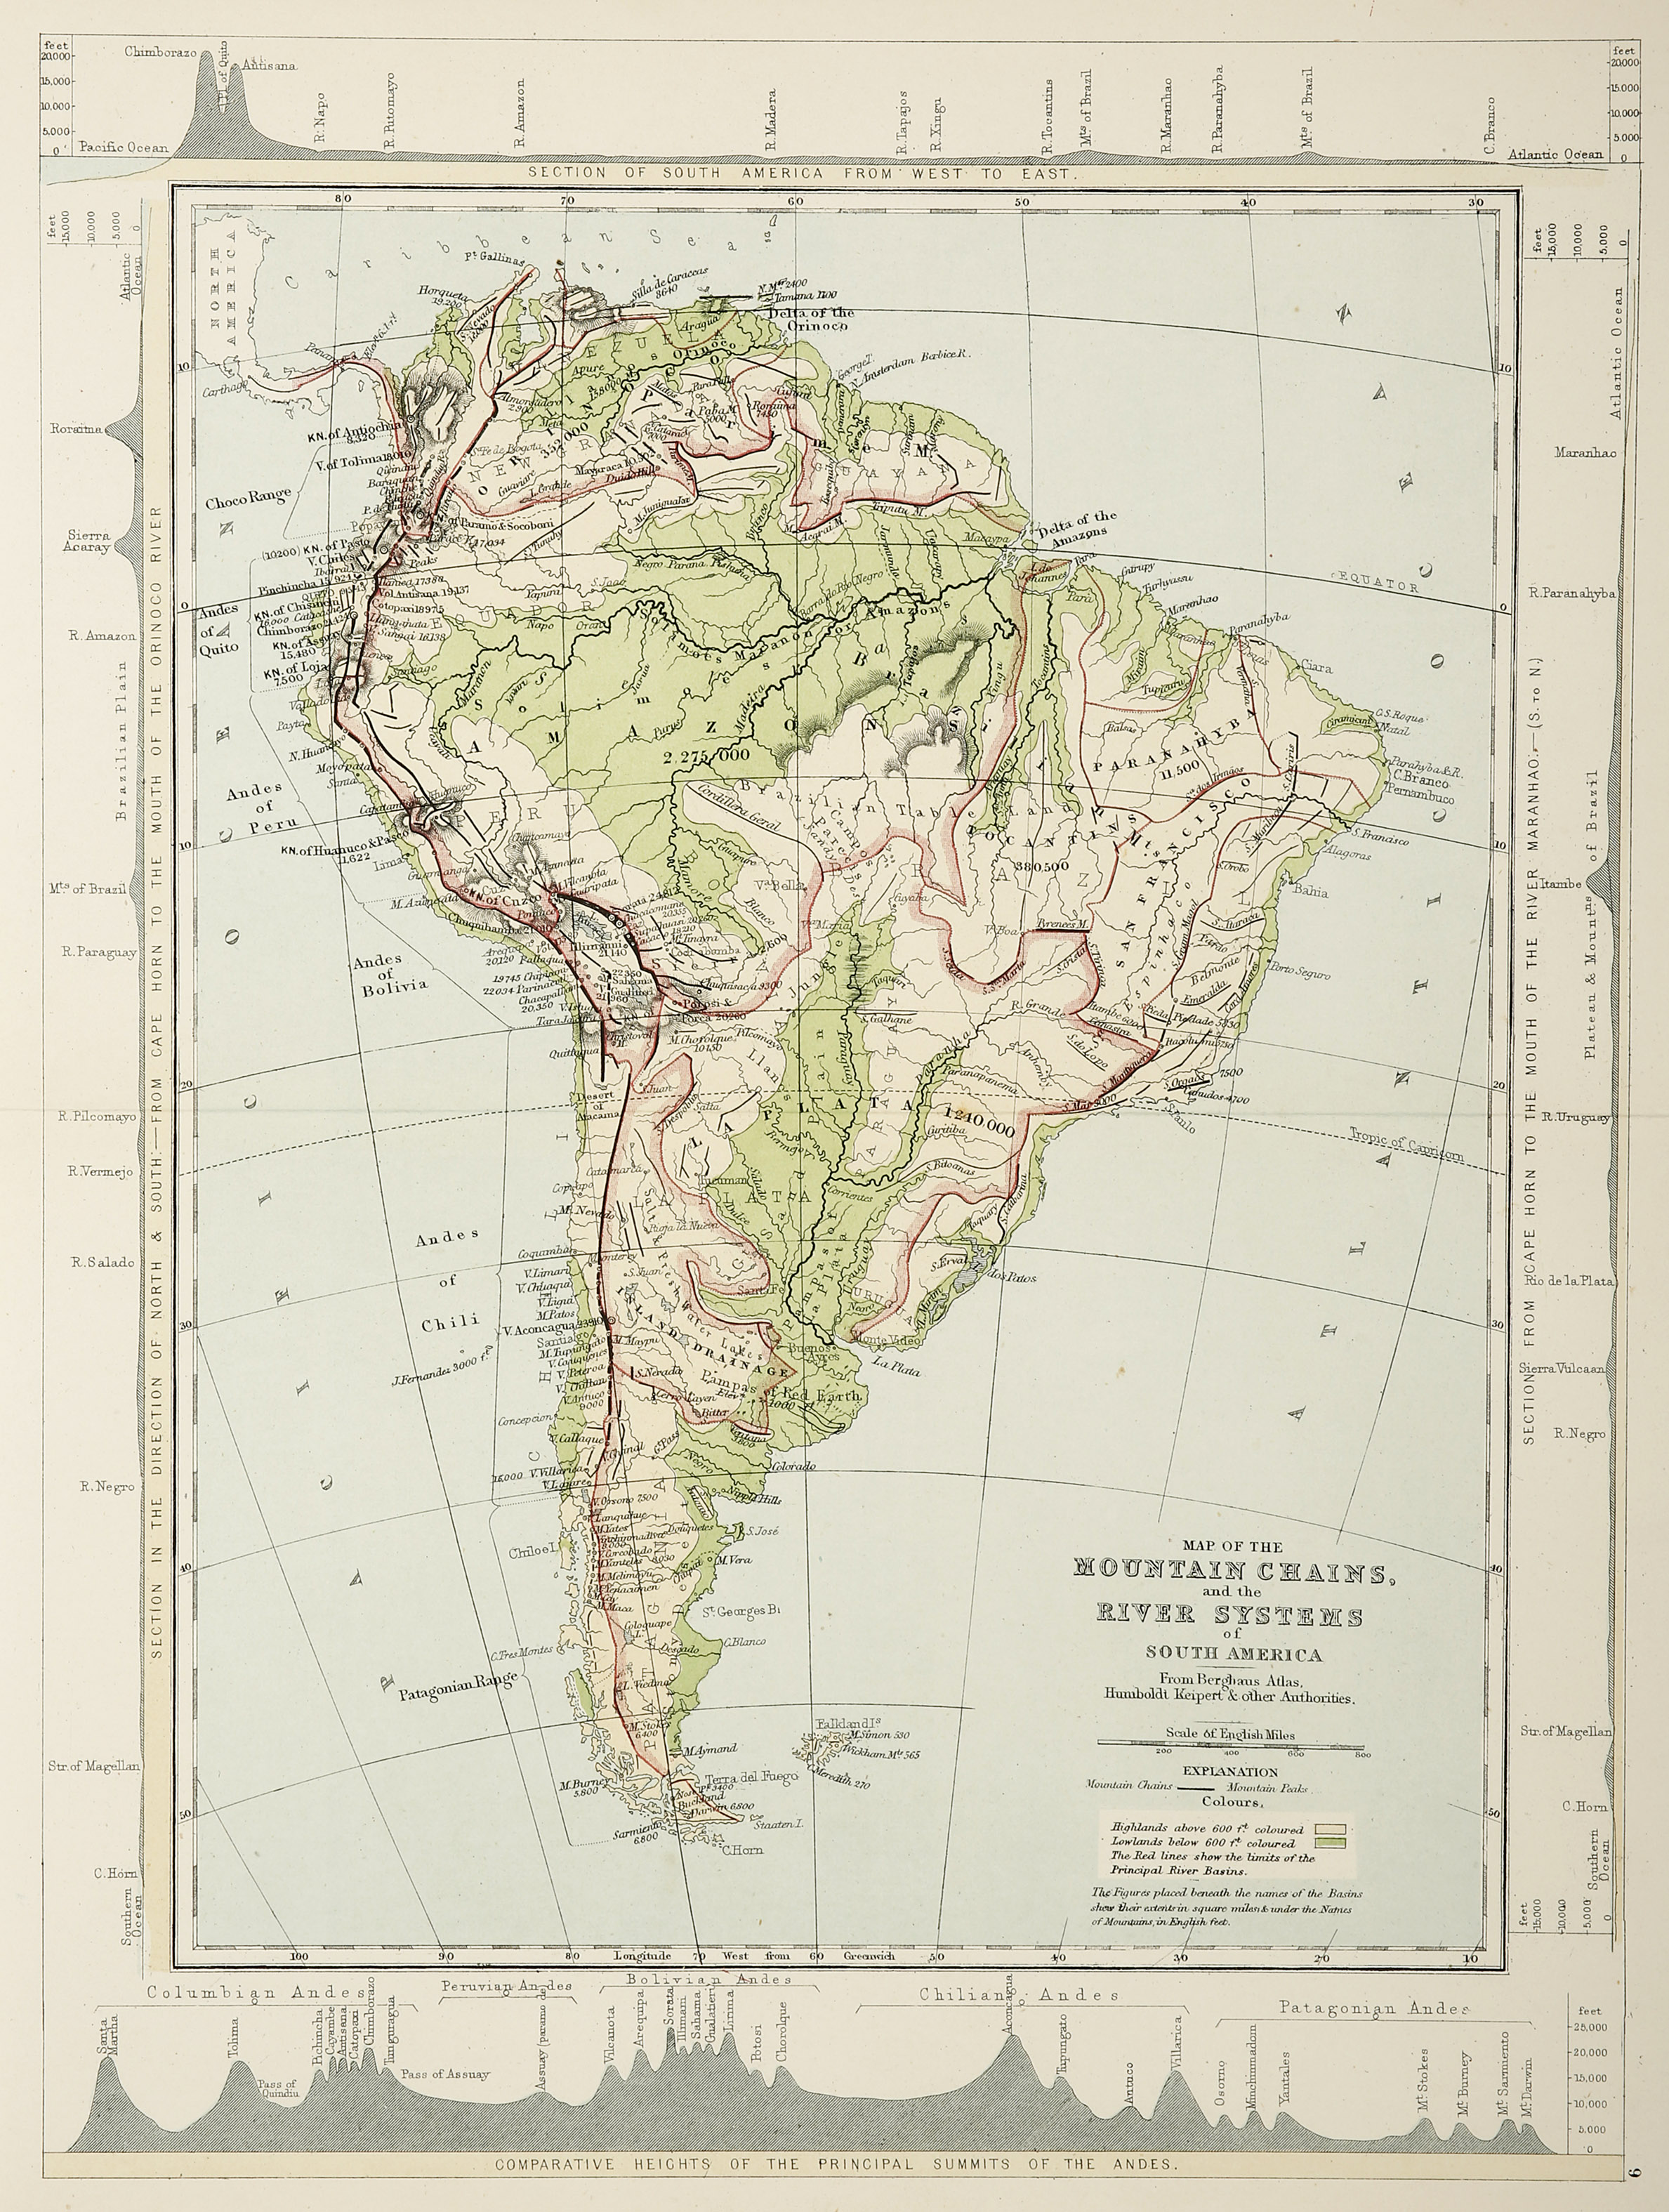 Map of the Mountain Chains, and the river systems of South America. - Antique Print from 1890